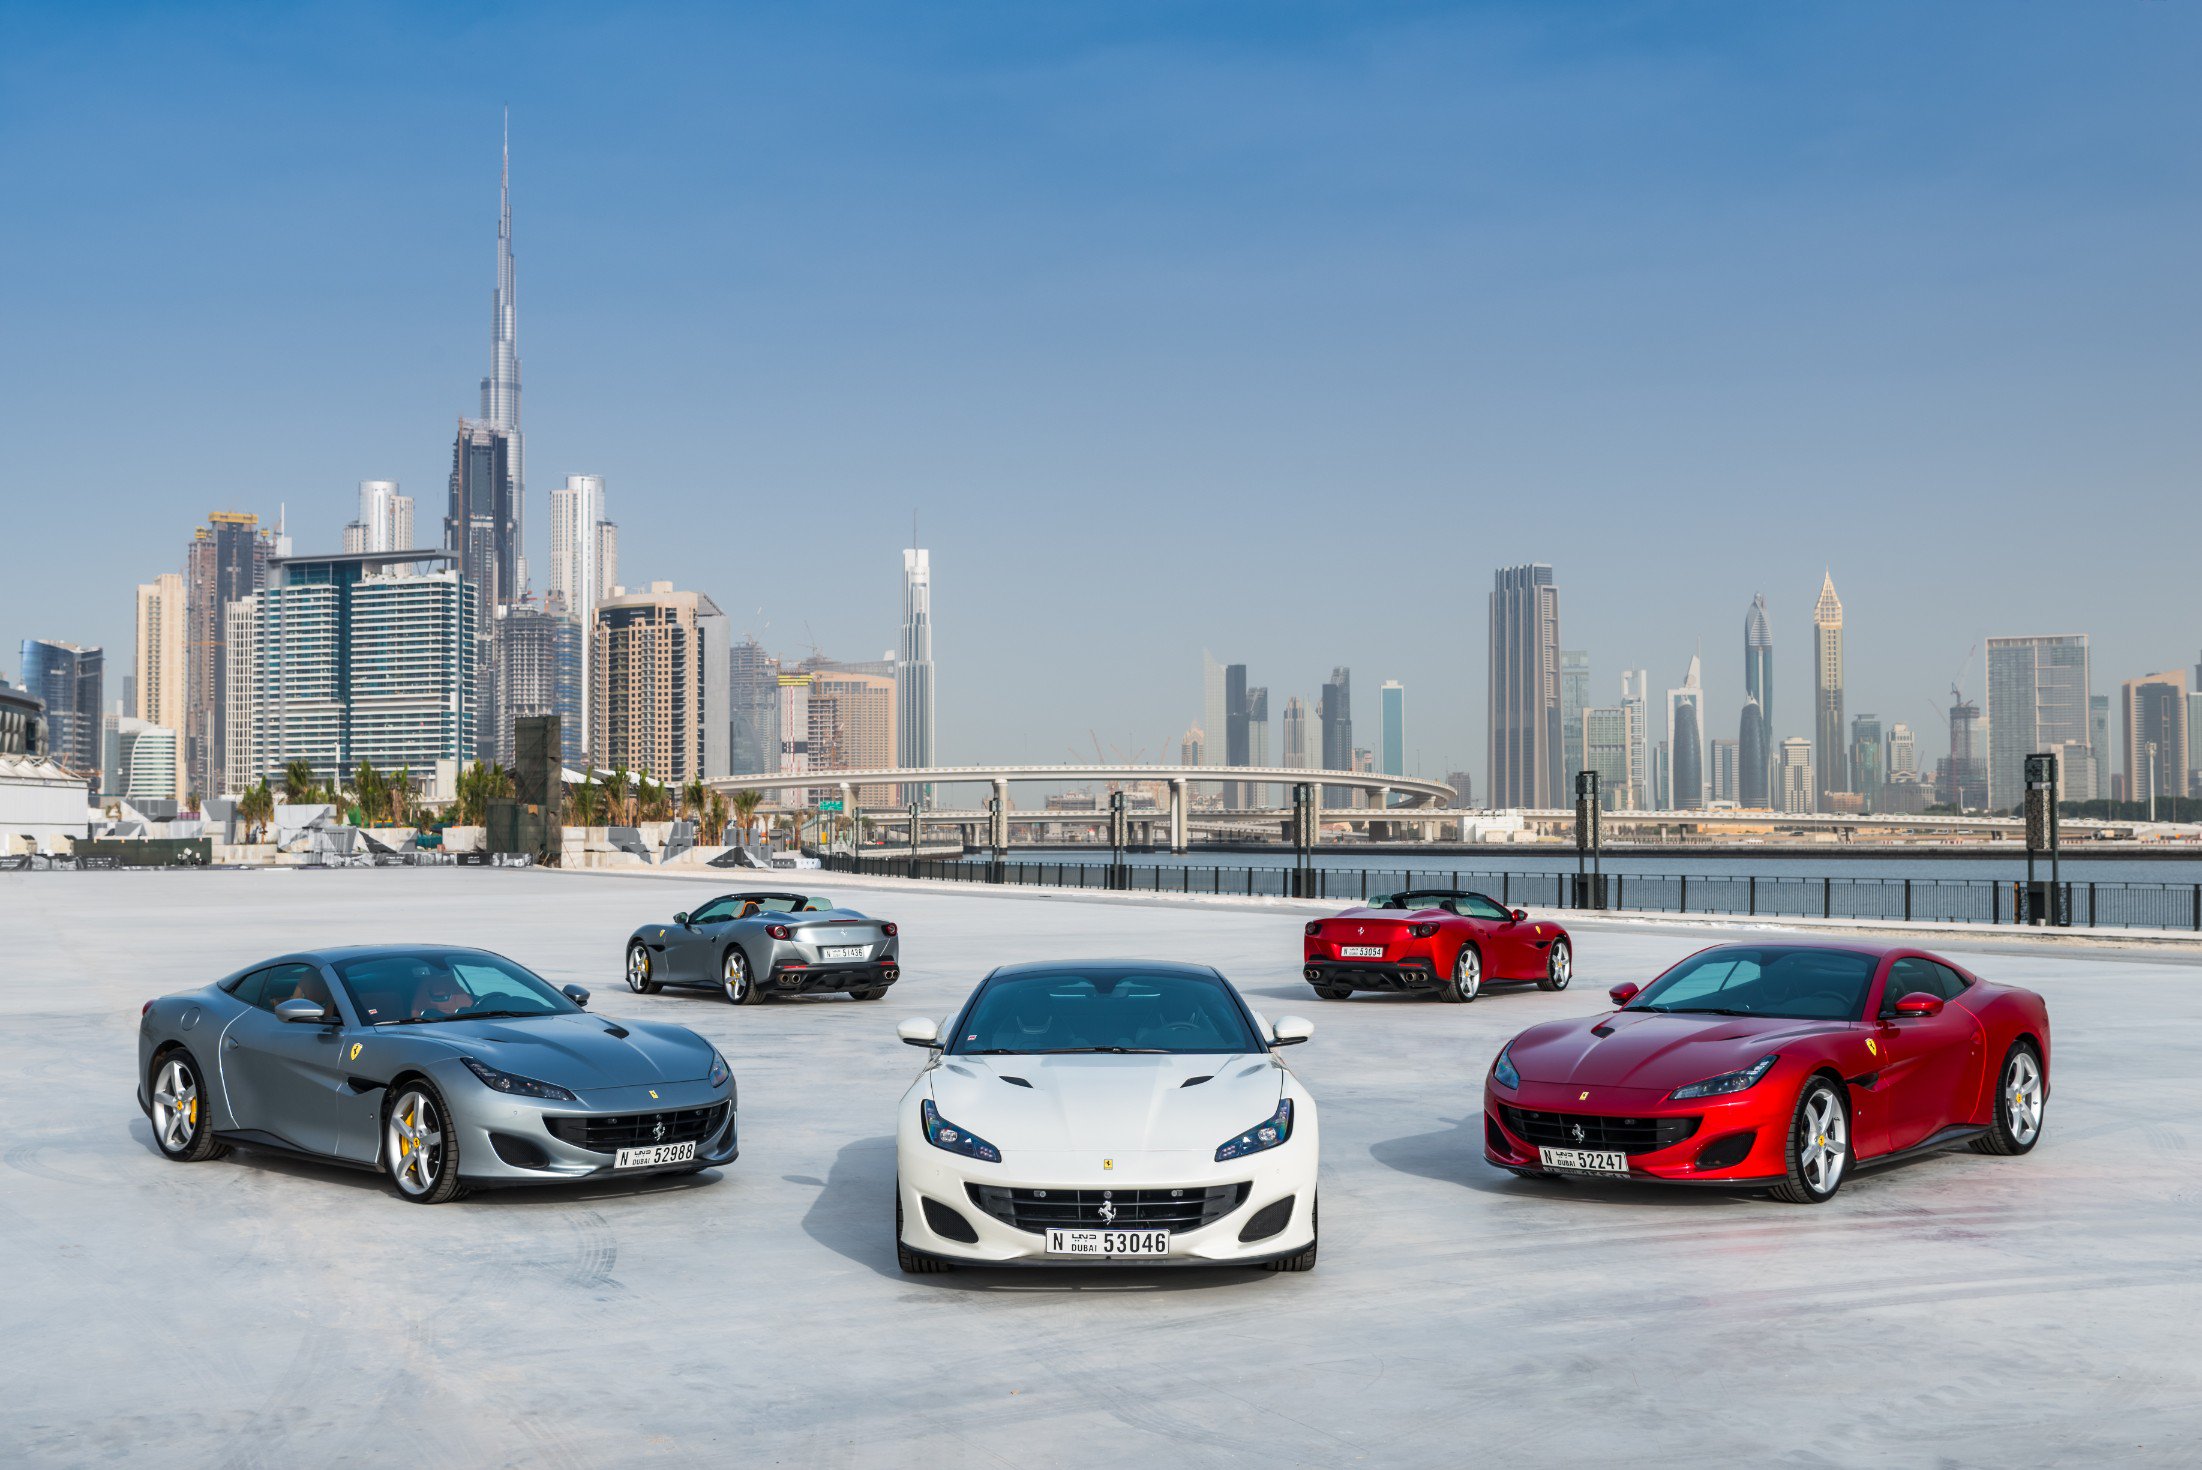 Leasing Tips For New Cars From Banks In Dubai